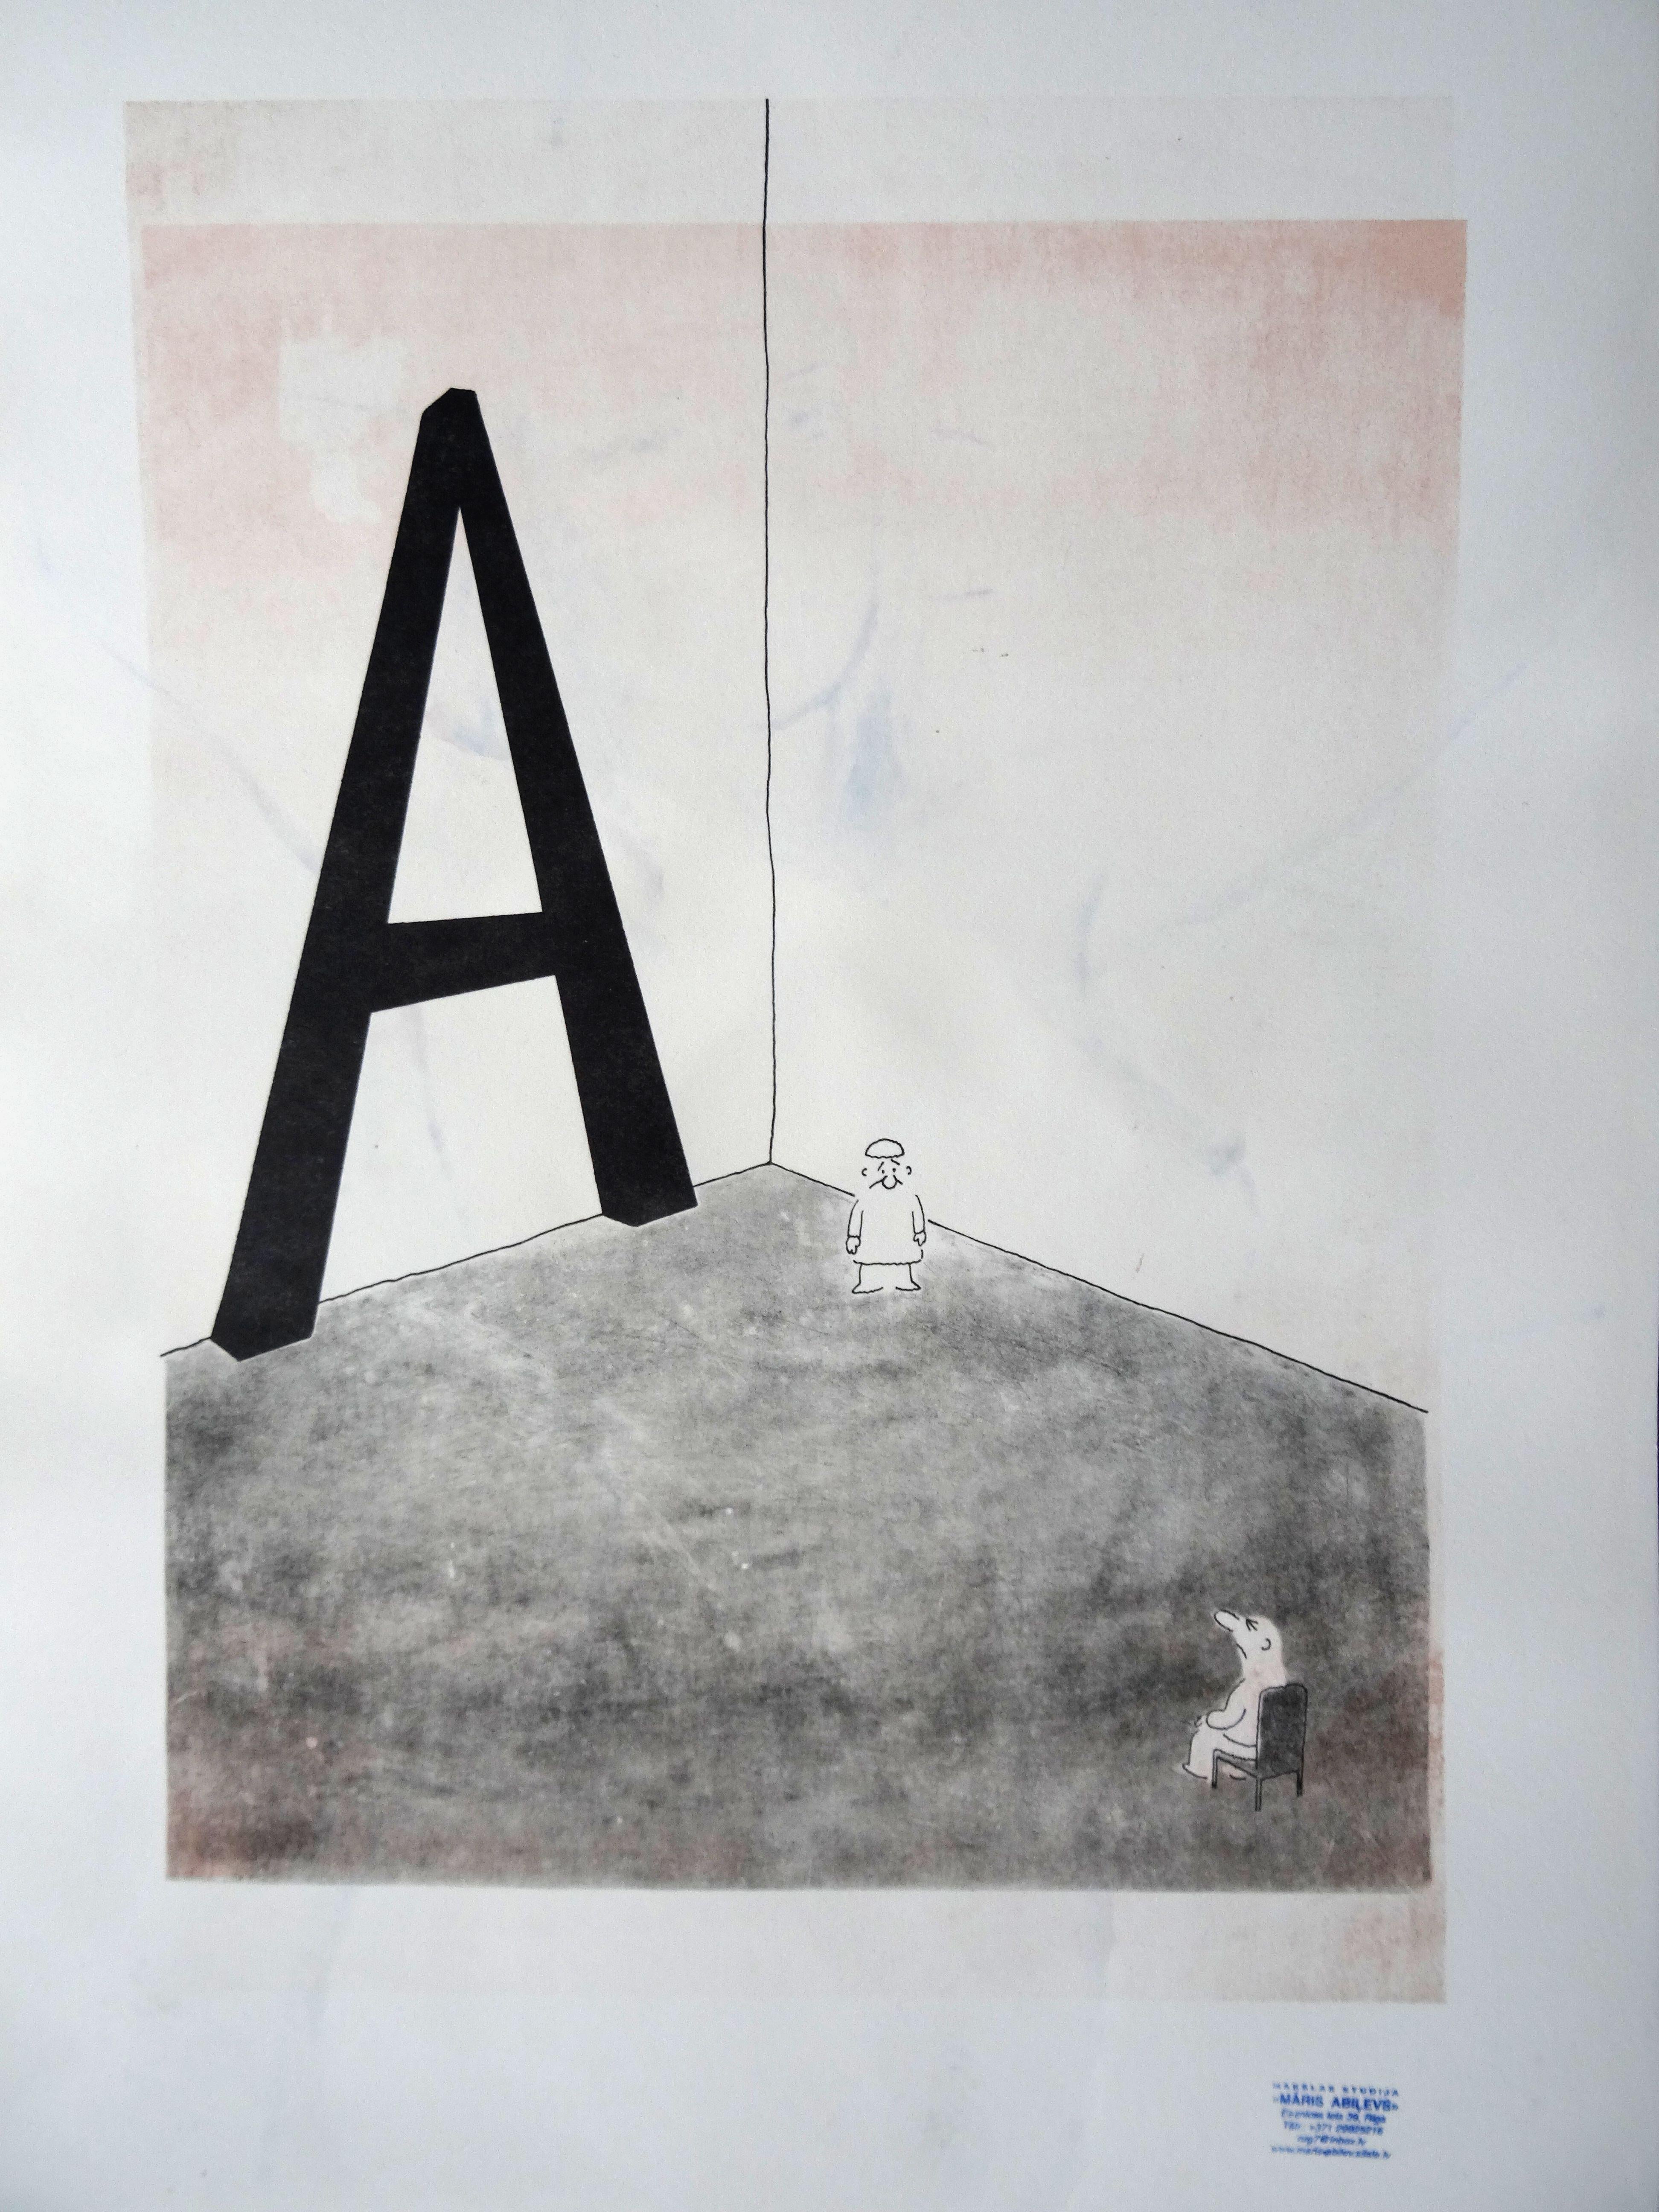 Act 96. 2021. Paper, mixed media, 61x43 cm
on the backside of the artwork lithography 